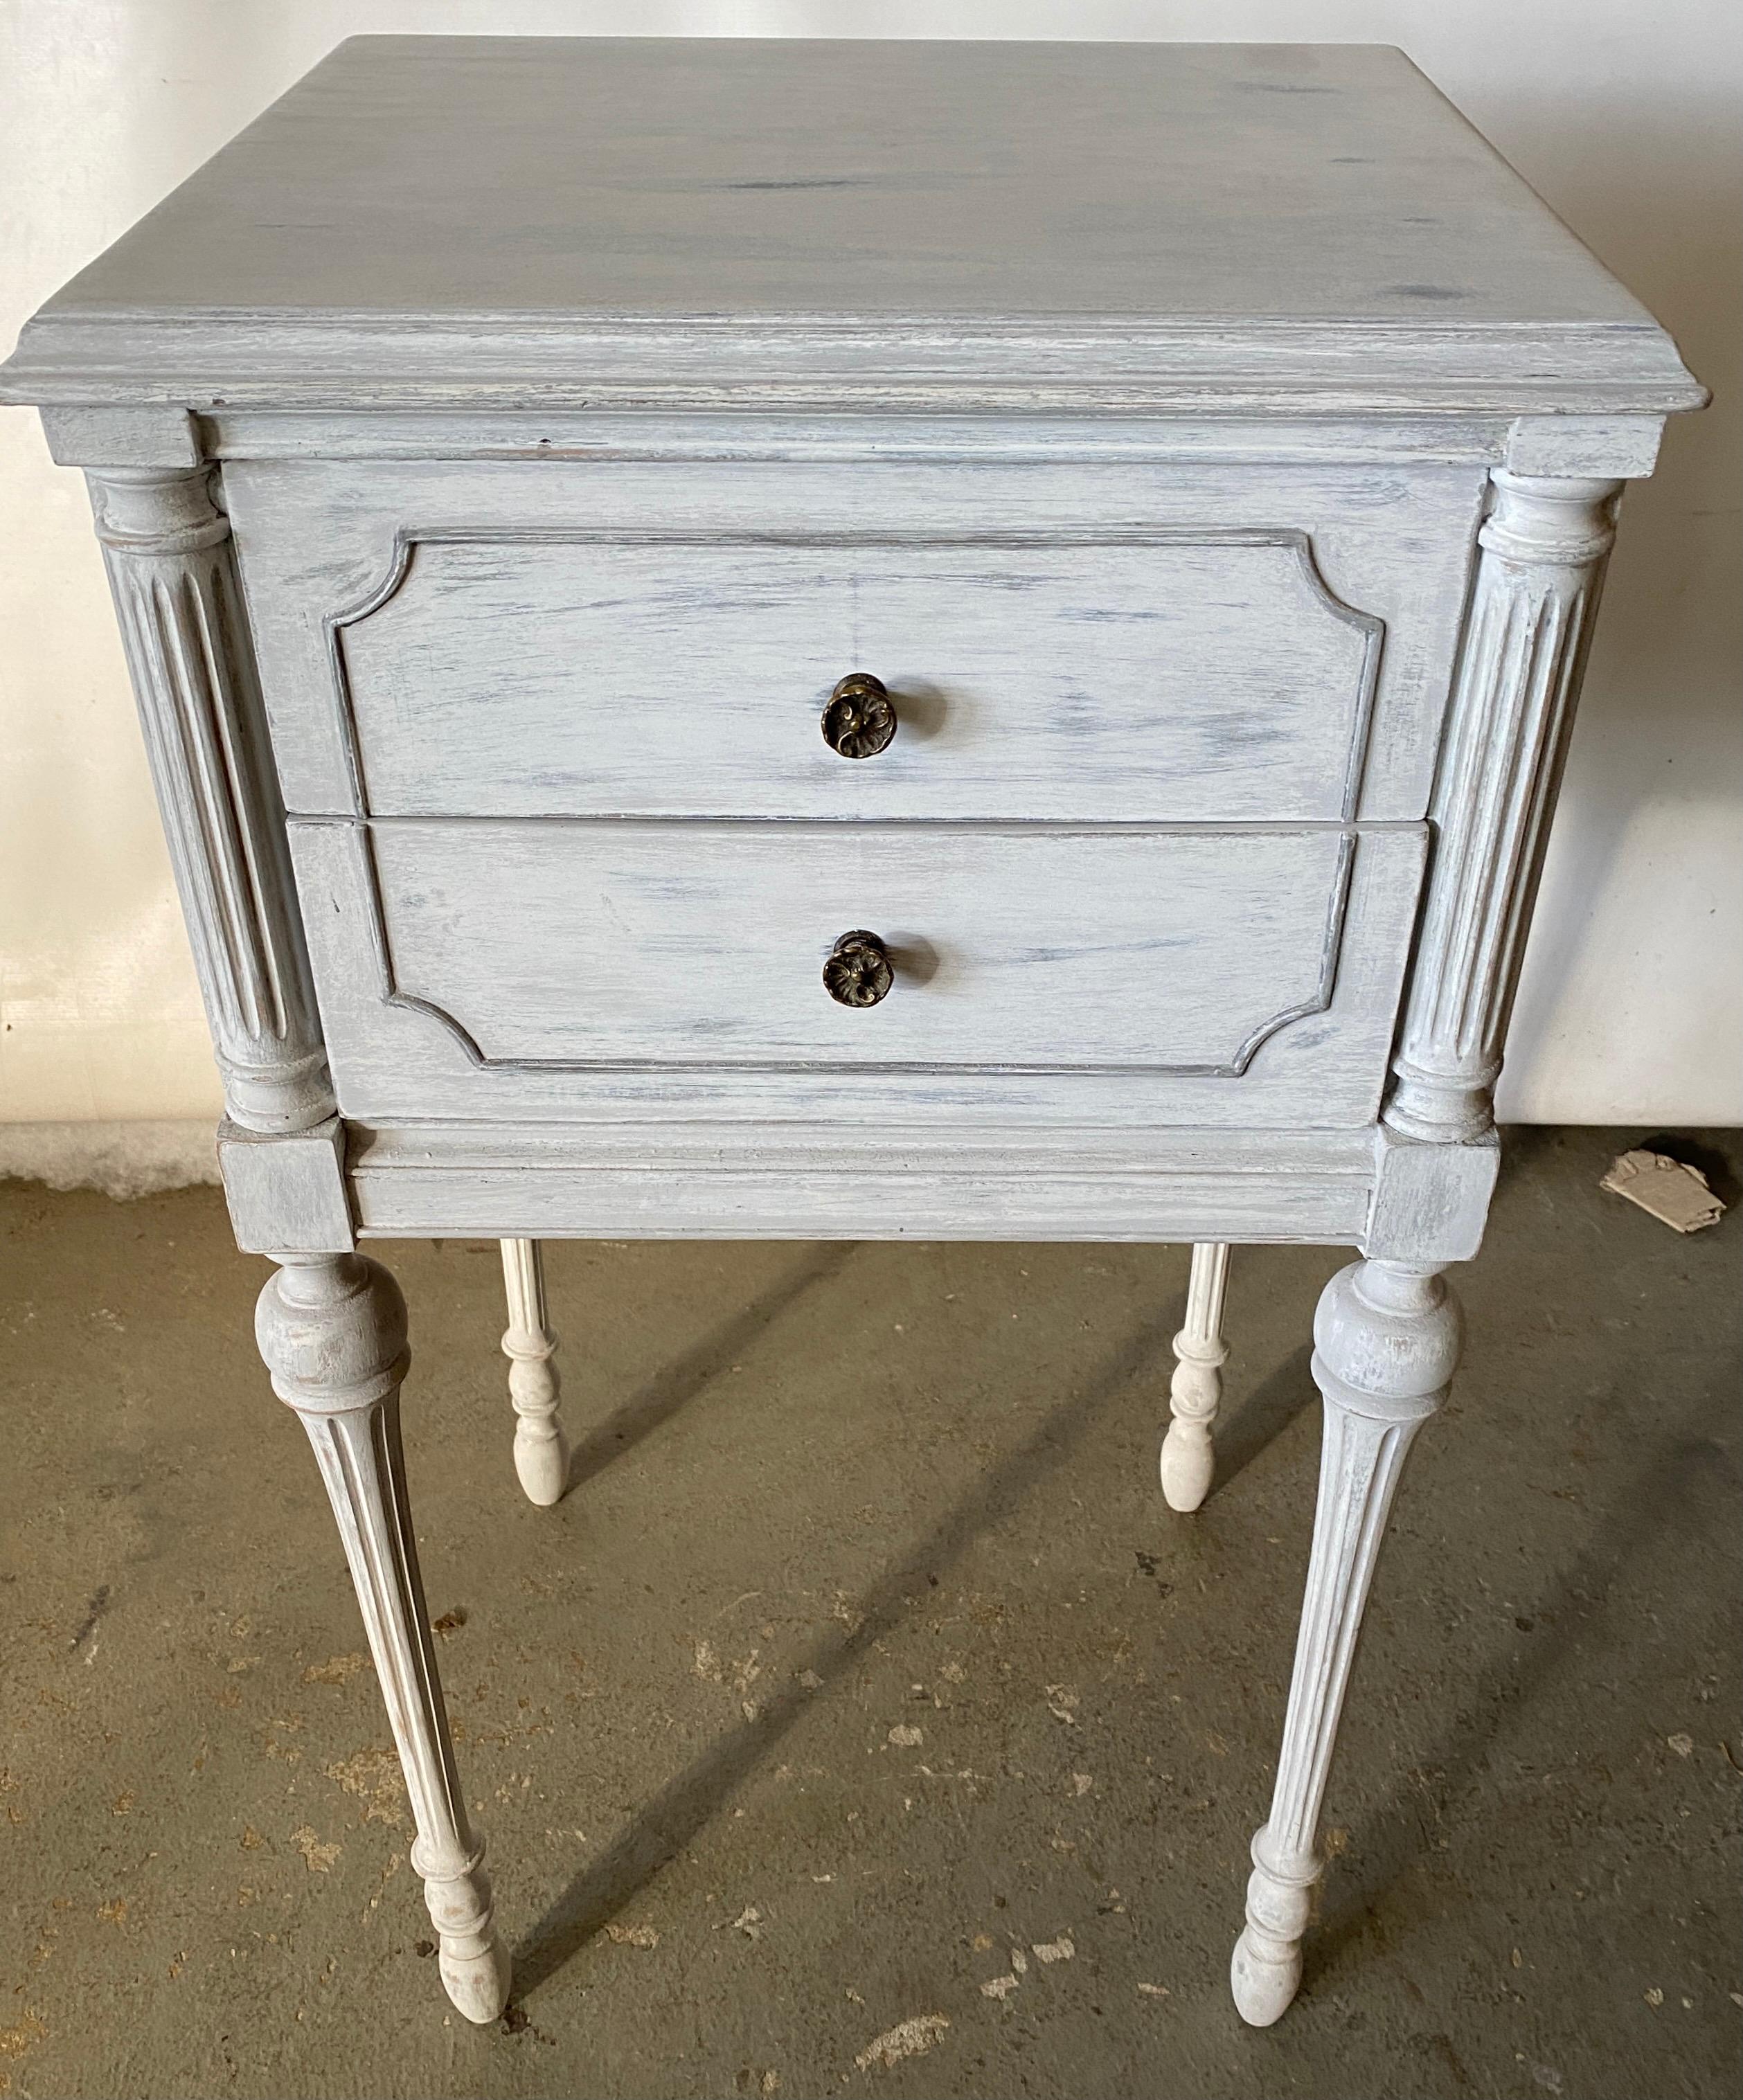 The grey and gold gilt painted metal night stand has an open upper shelf with a pull out tray with a cubby hole or lower shelf for more storage. This night table or stand will fill the bill if you are searching for a Swedish Gustavian, neoclassical